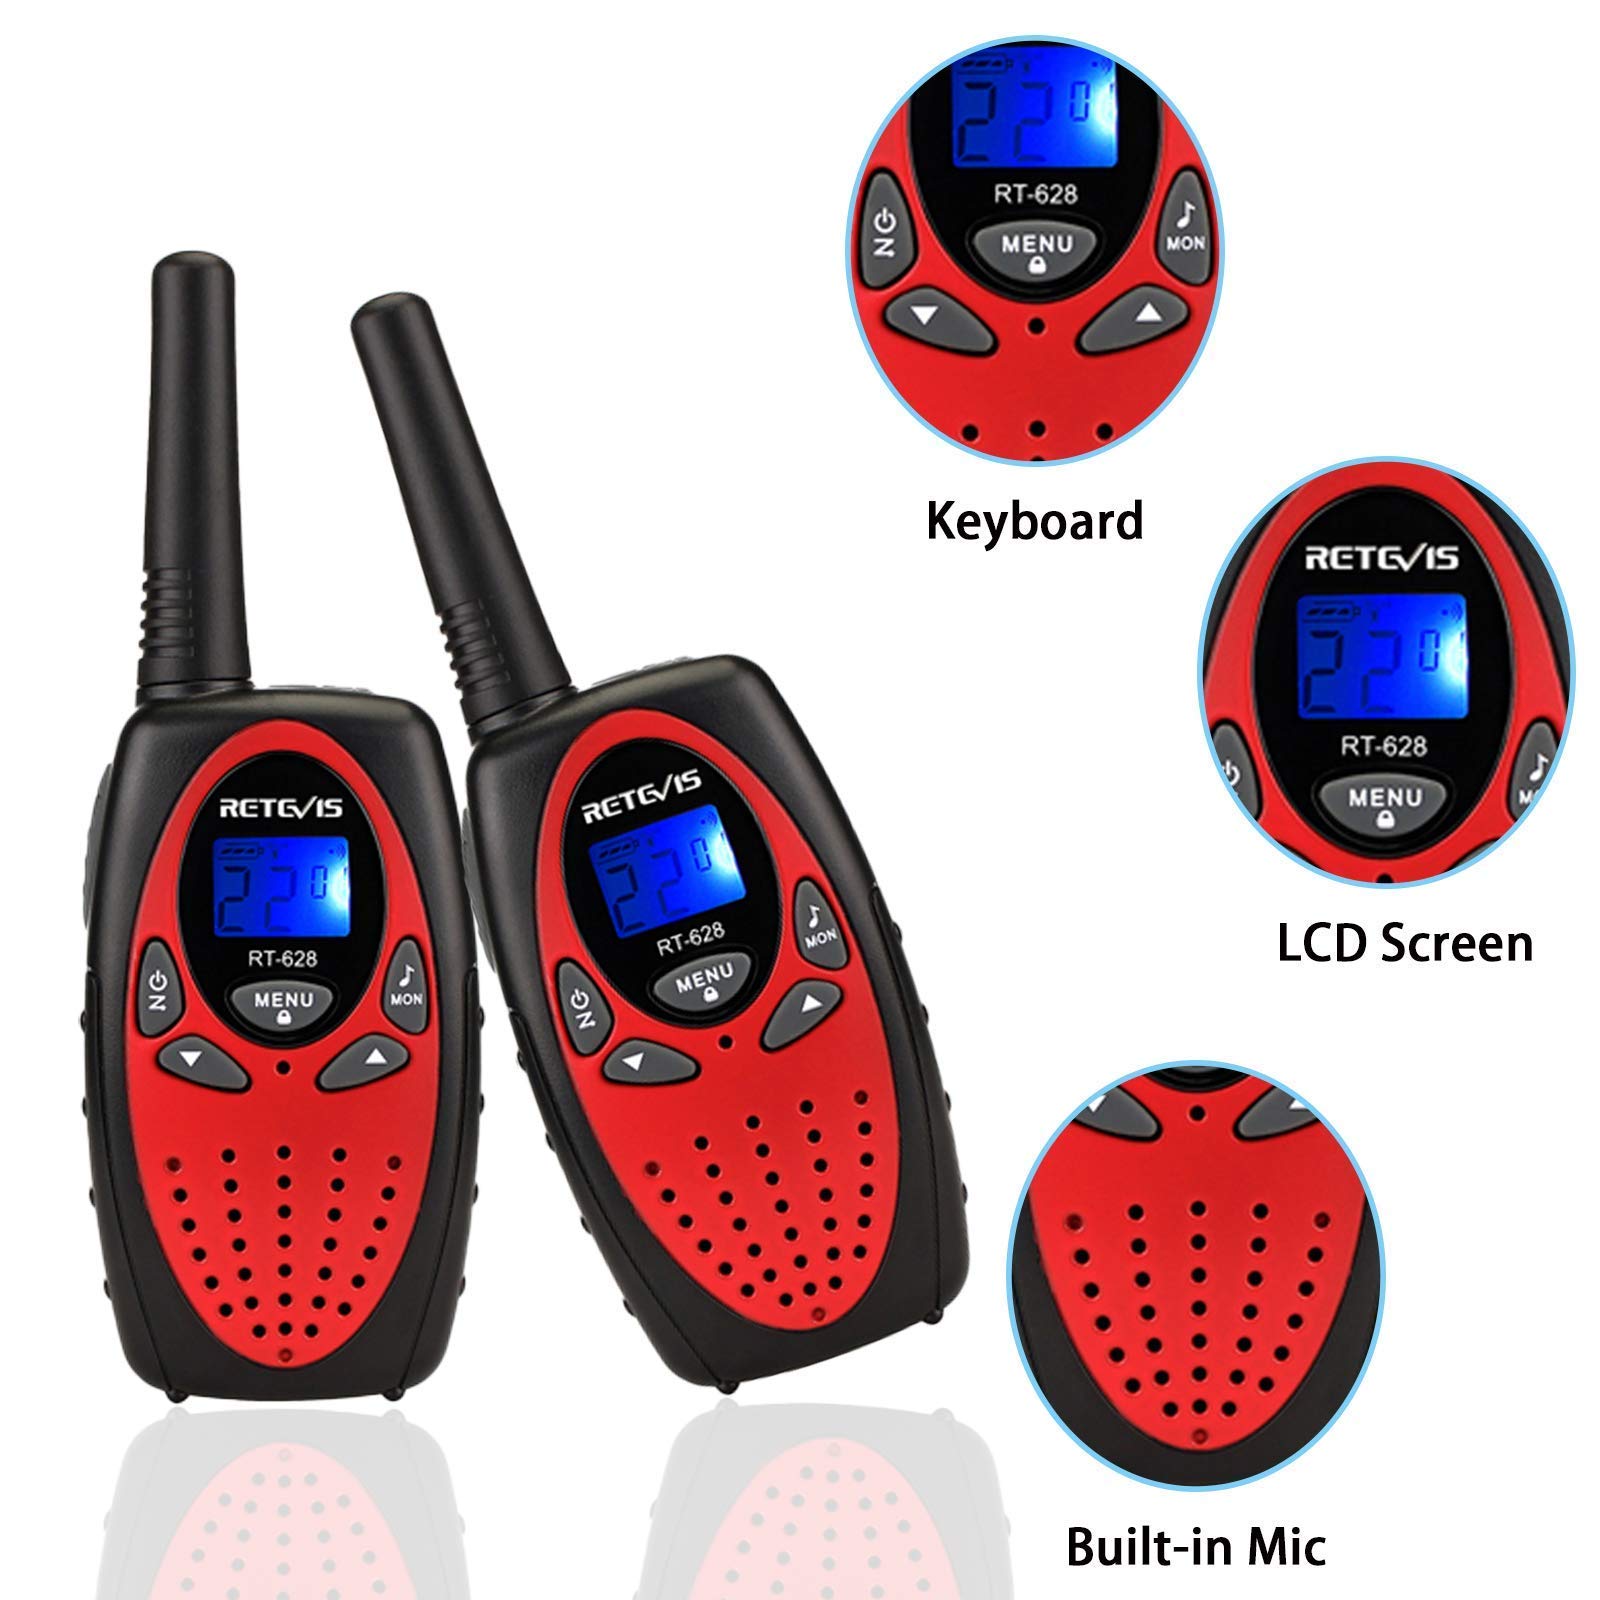 Retevis RT628 Walkie Talkies for Kids,2 Way Radio for Boys Girls Bundle with RT628 Rechargeable Long Range Walkie Talkie with Battery,Kids Toys for Family Outdoor Camping Traveling (4 Pack)